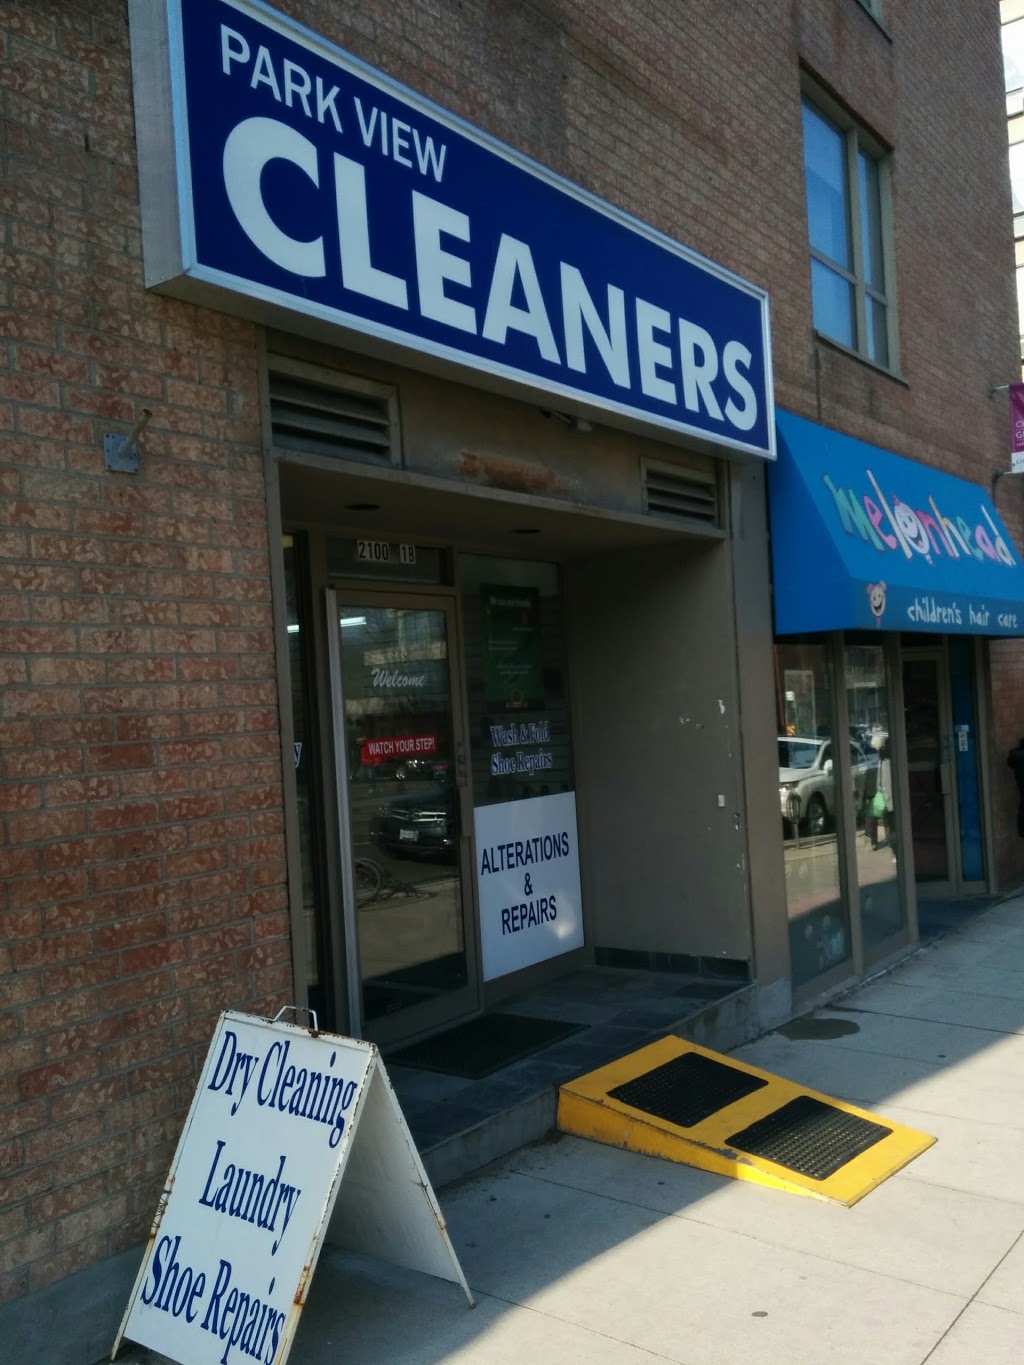 Parkview Cleaners | laundry | 2100 Bloor St W Unit 1B, Toronto, ON M6S 1M7, Canada | 4167679513 OR +1 416-767-9513